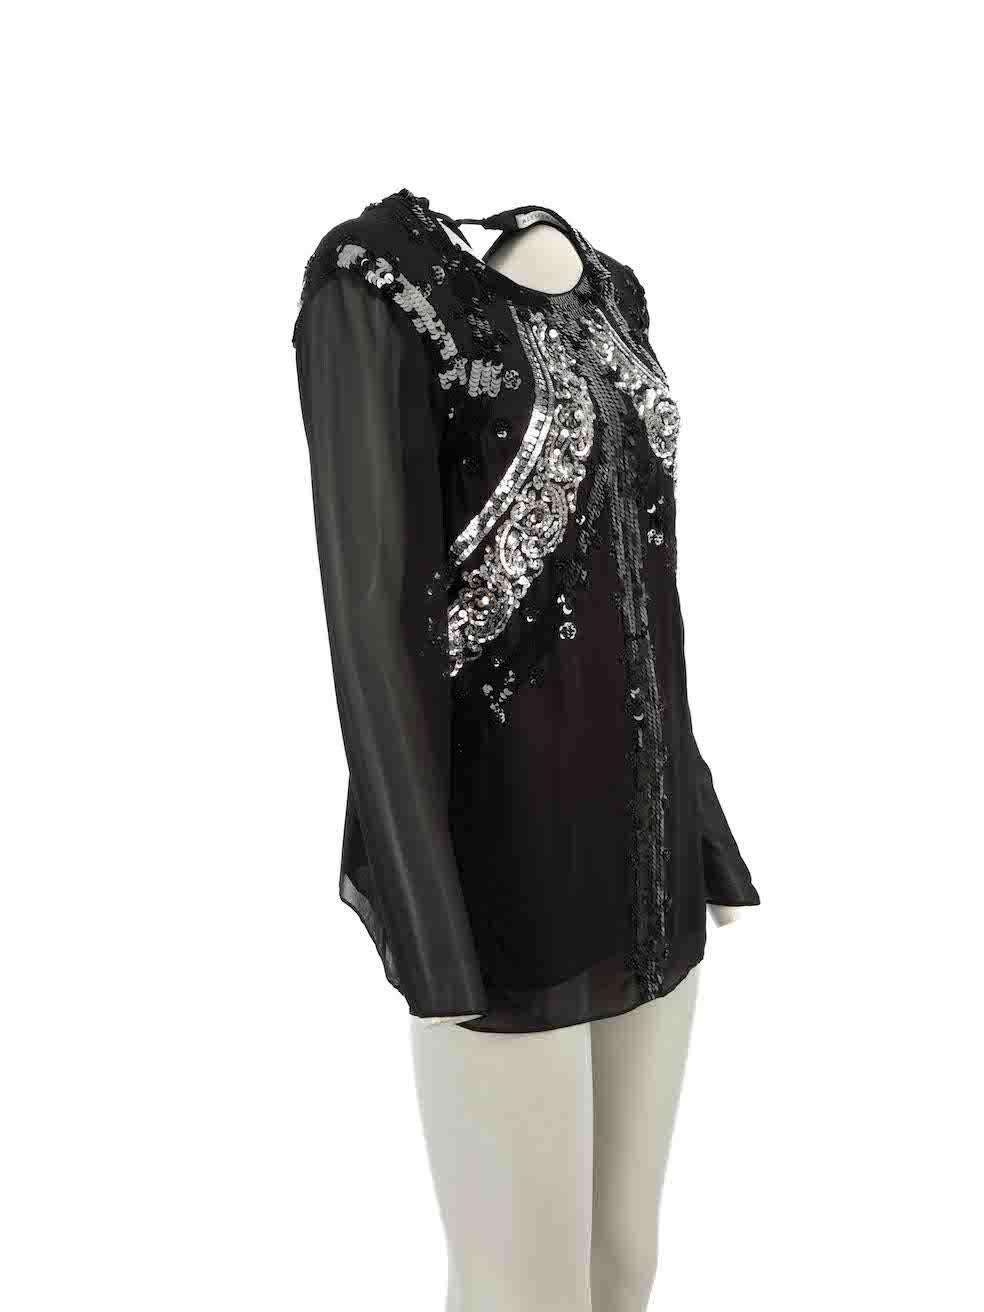 CONDITION is Good. Minor wear to top is evident. Light wear to embellishment with a handful of sequins missing at the right shoulder on this used Altuzarra resale item.
 
Details
Black
Silk
Long sleeves top
Sheer
Sequinned embellishment
Round